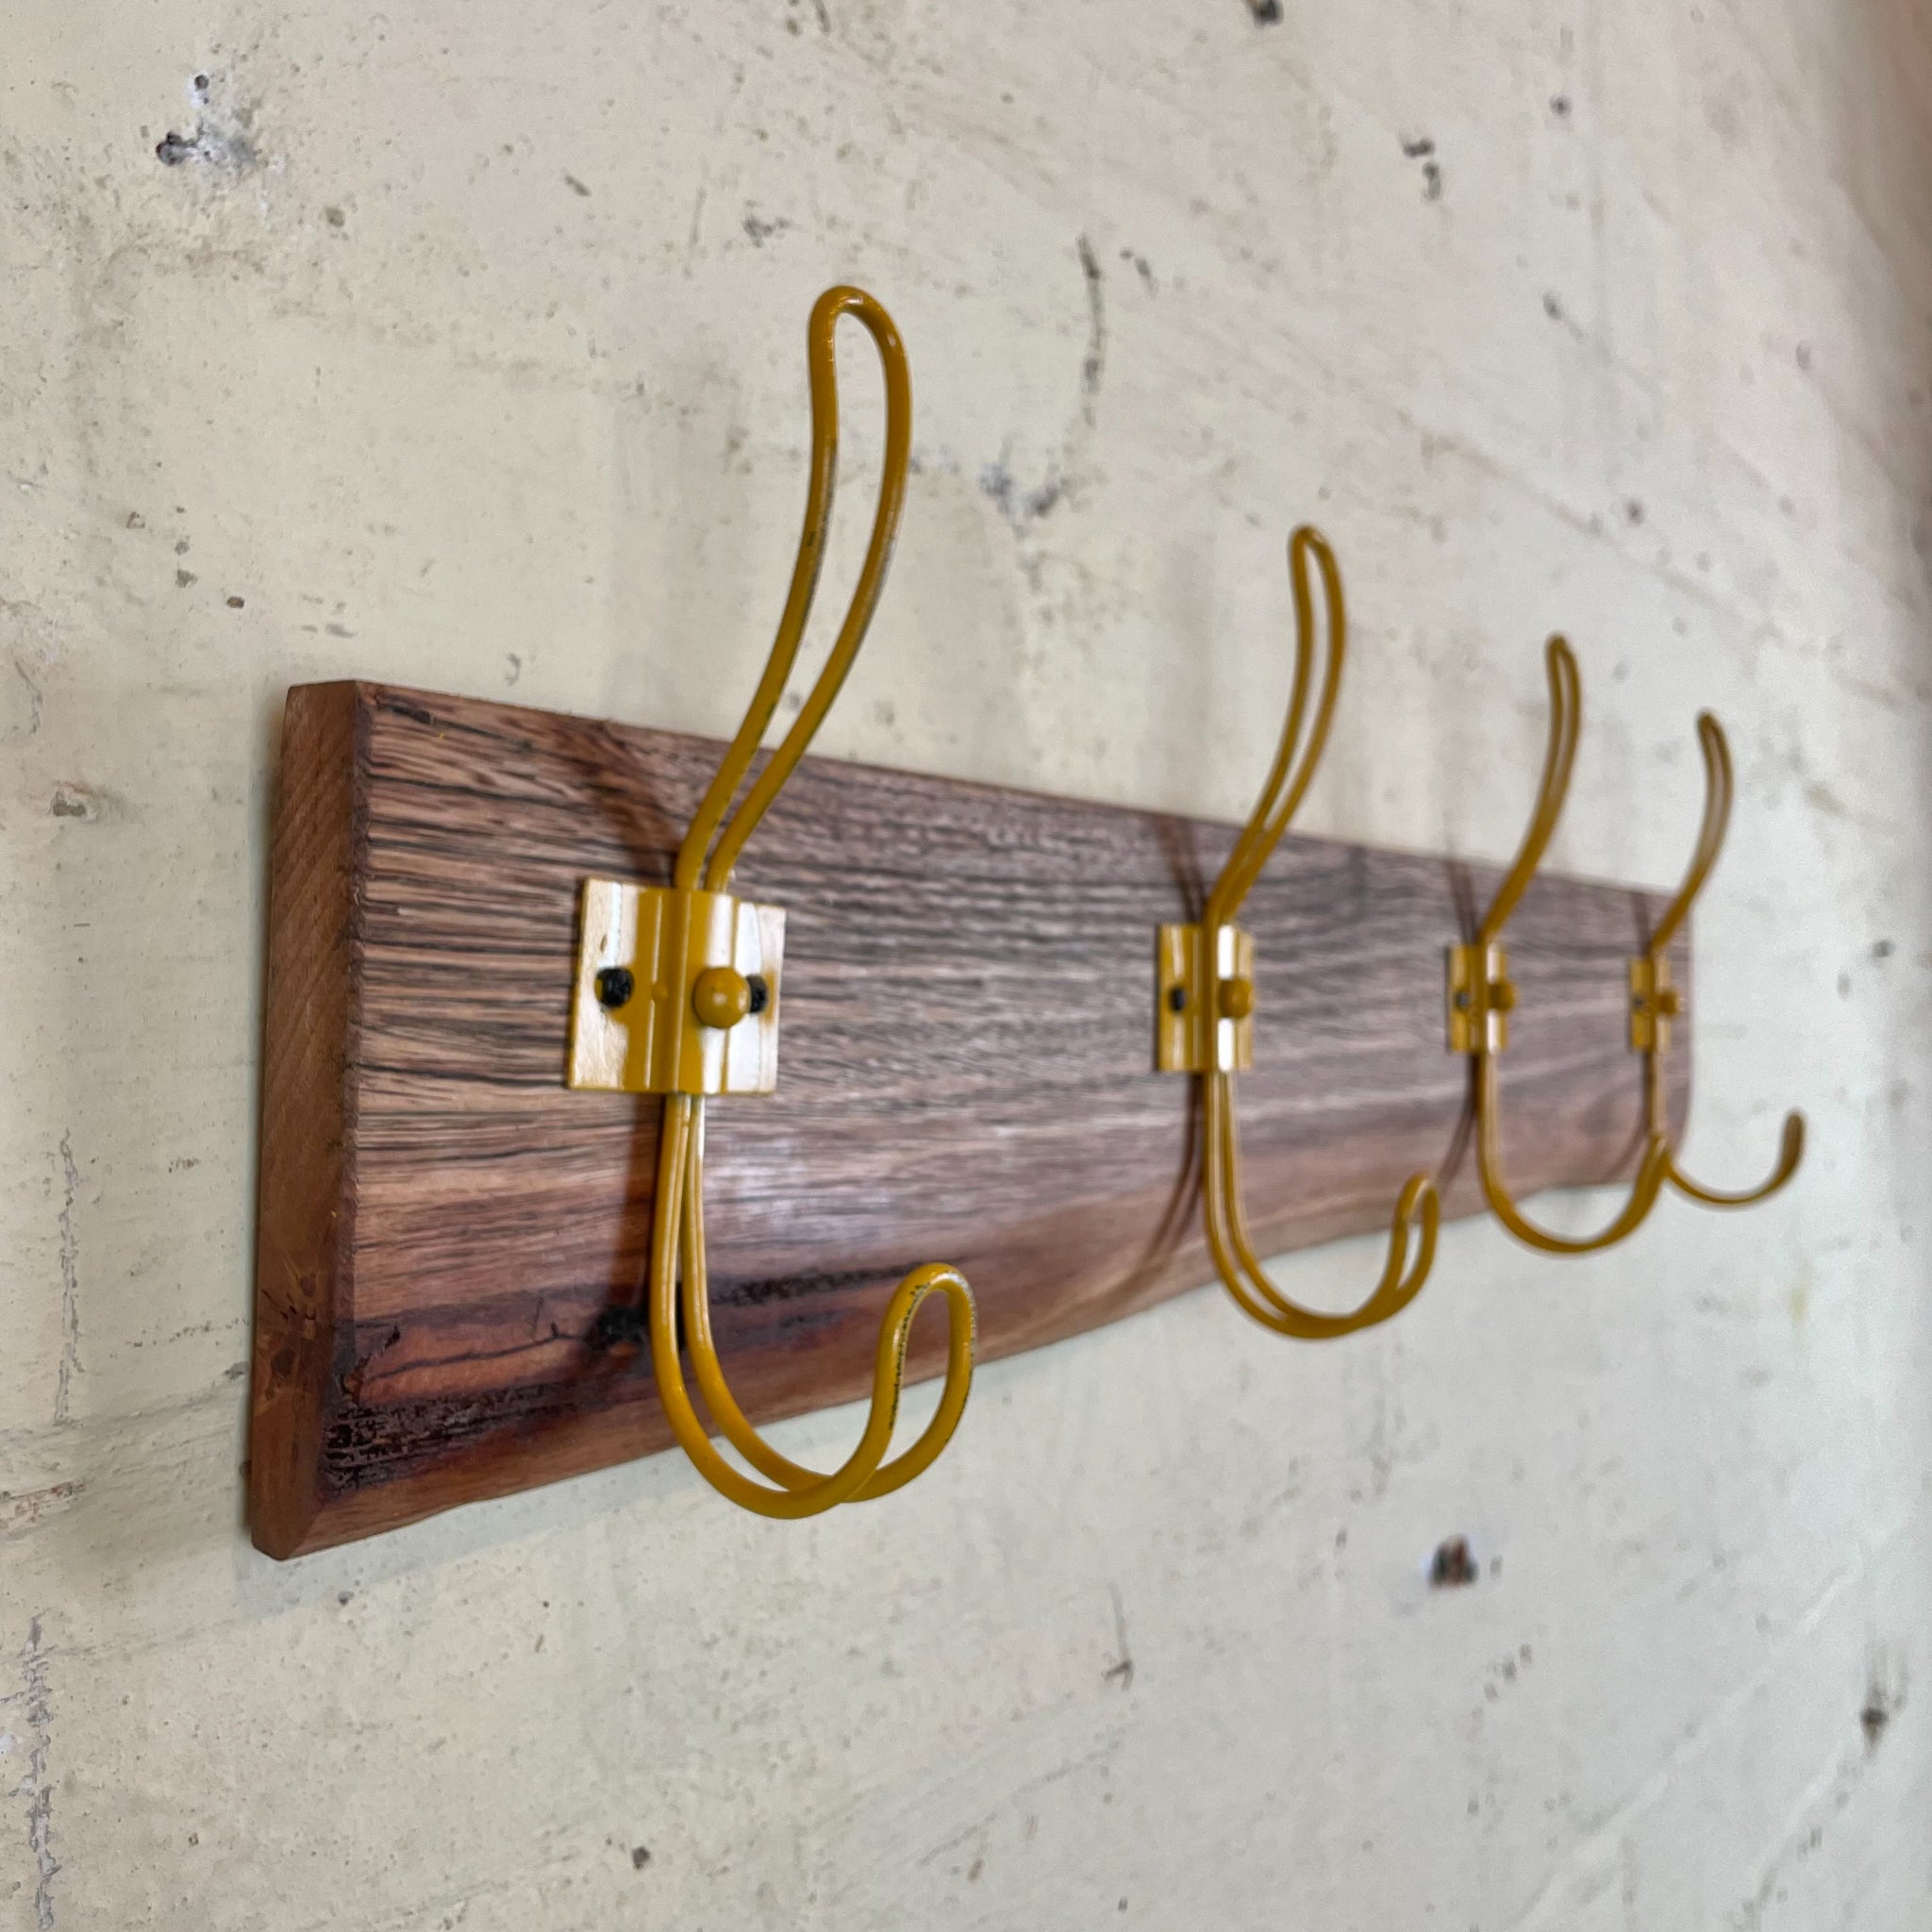 Upcycled Wooden coat rack and hat rack with gold hooks. Australia